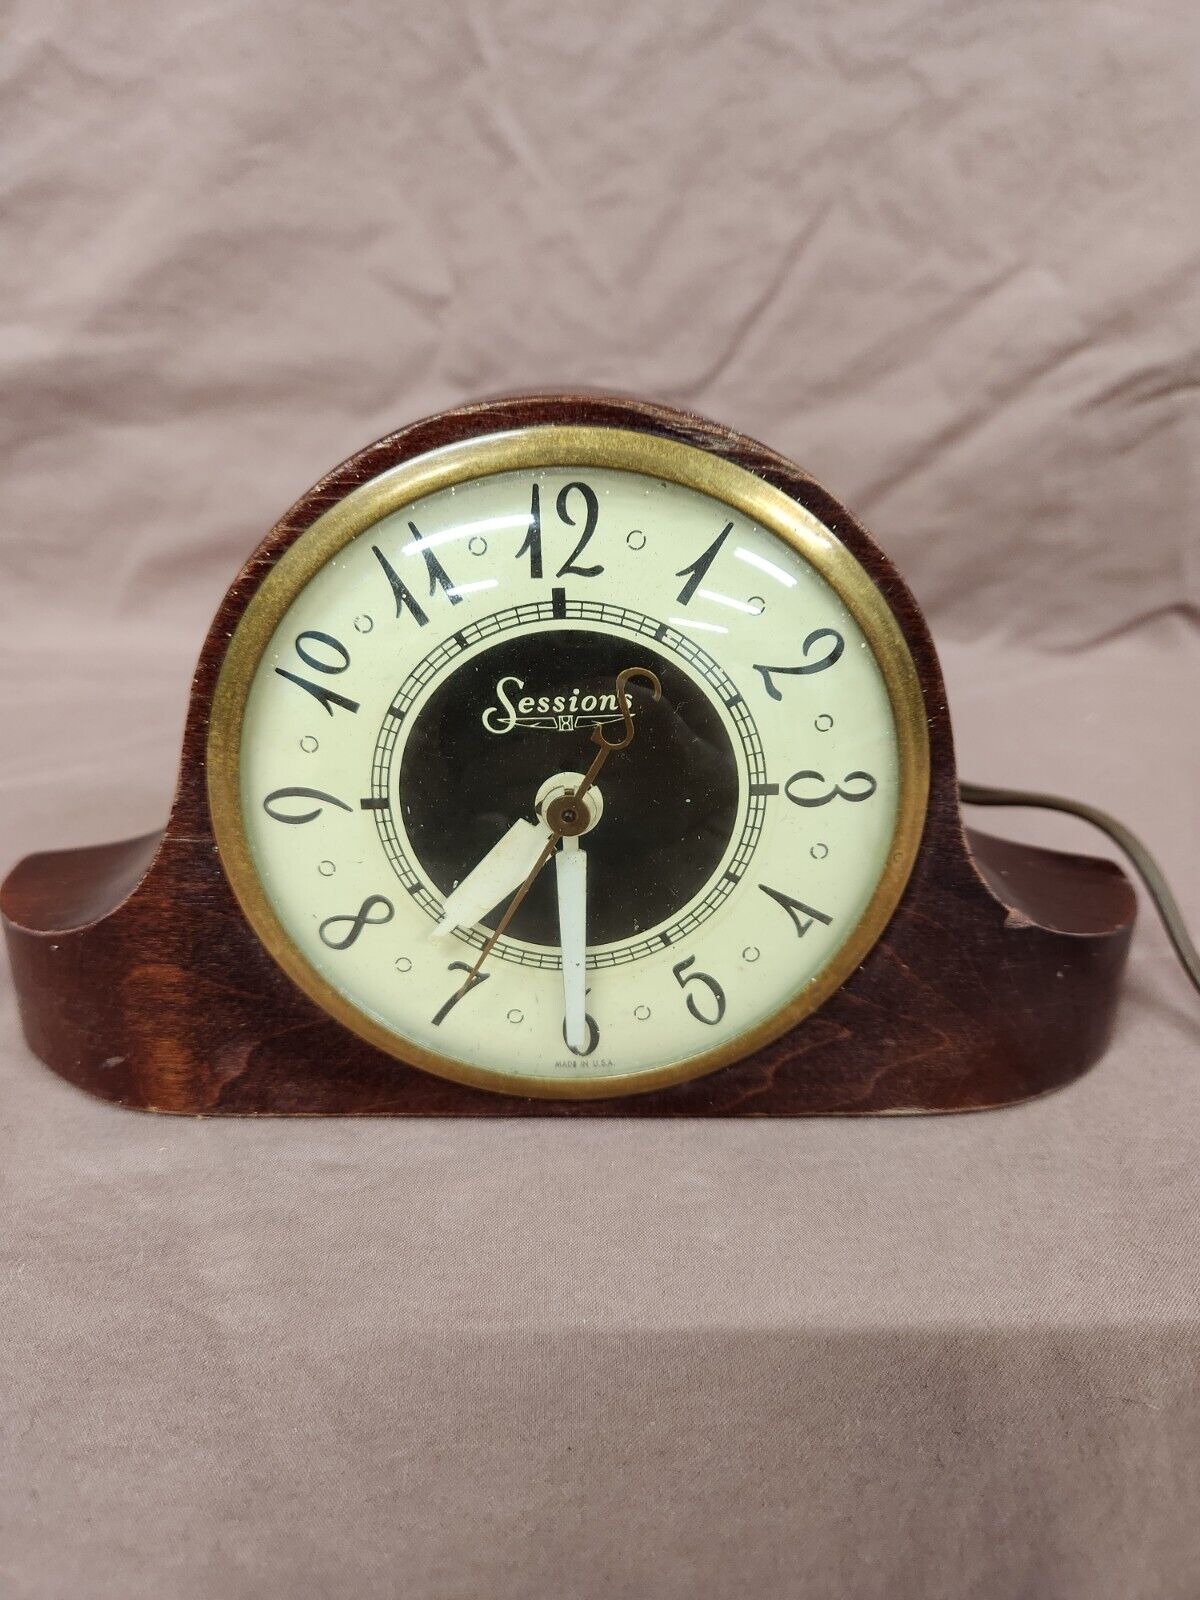 Antique Sessions Model 3W Electric Mantle Clock 60 Cycle Works Condition